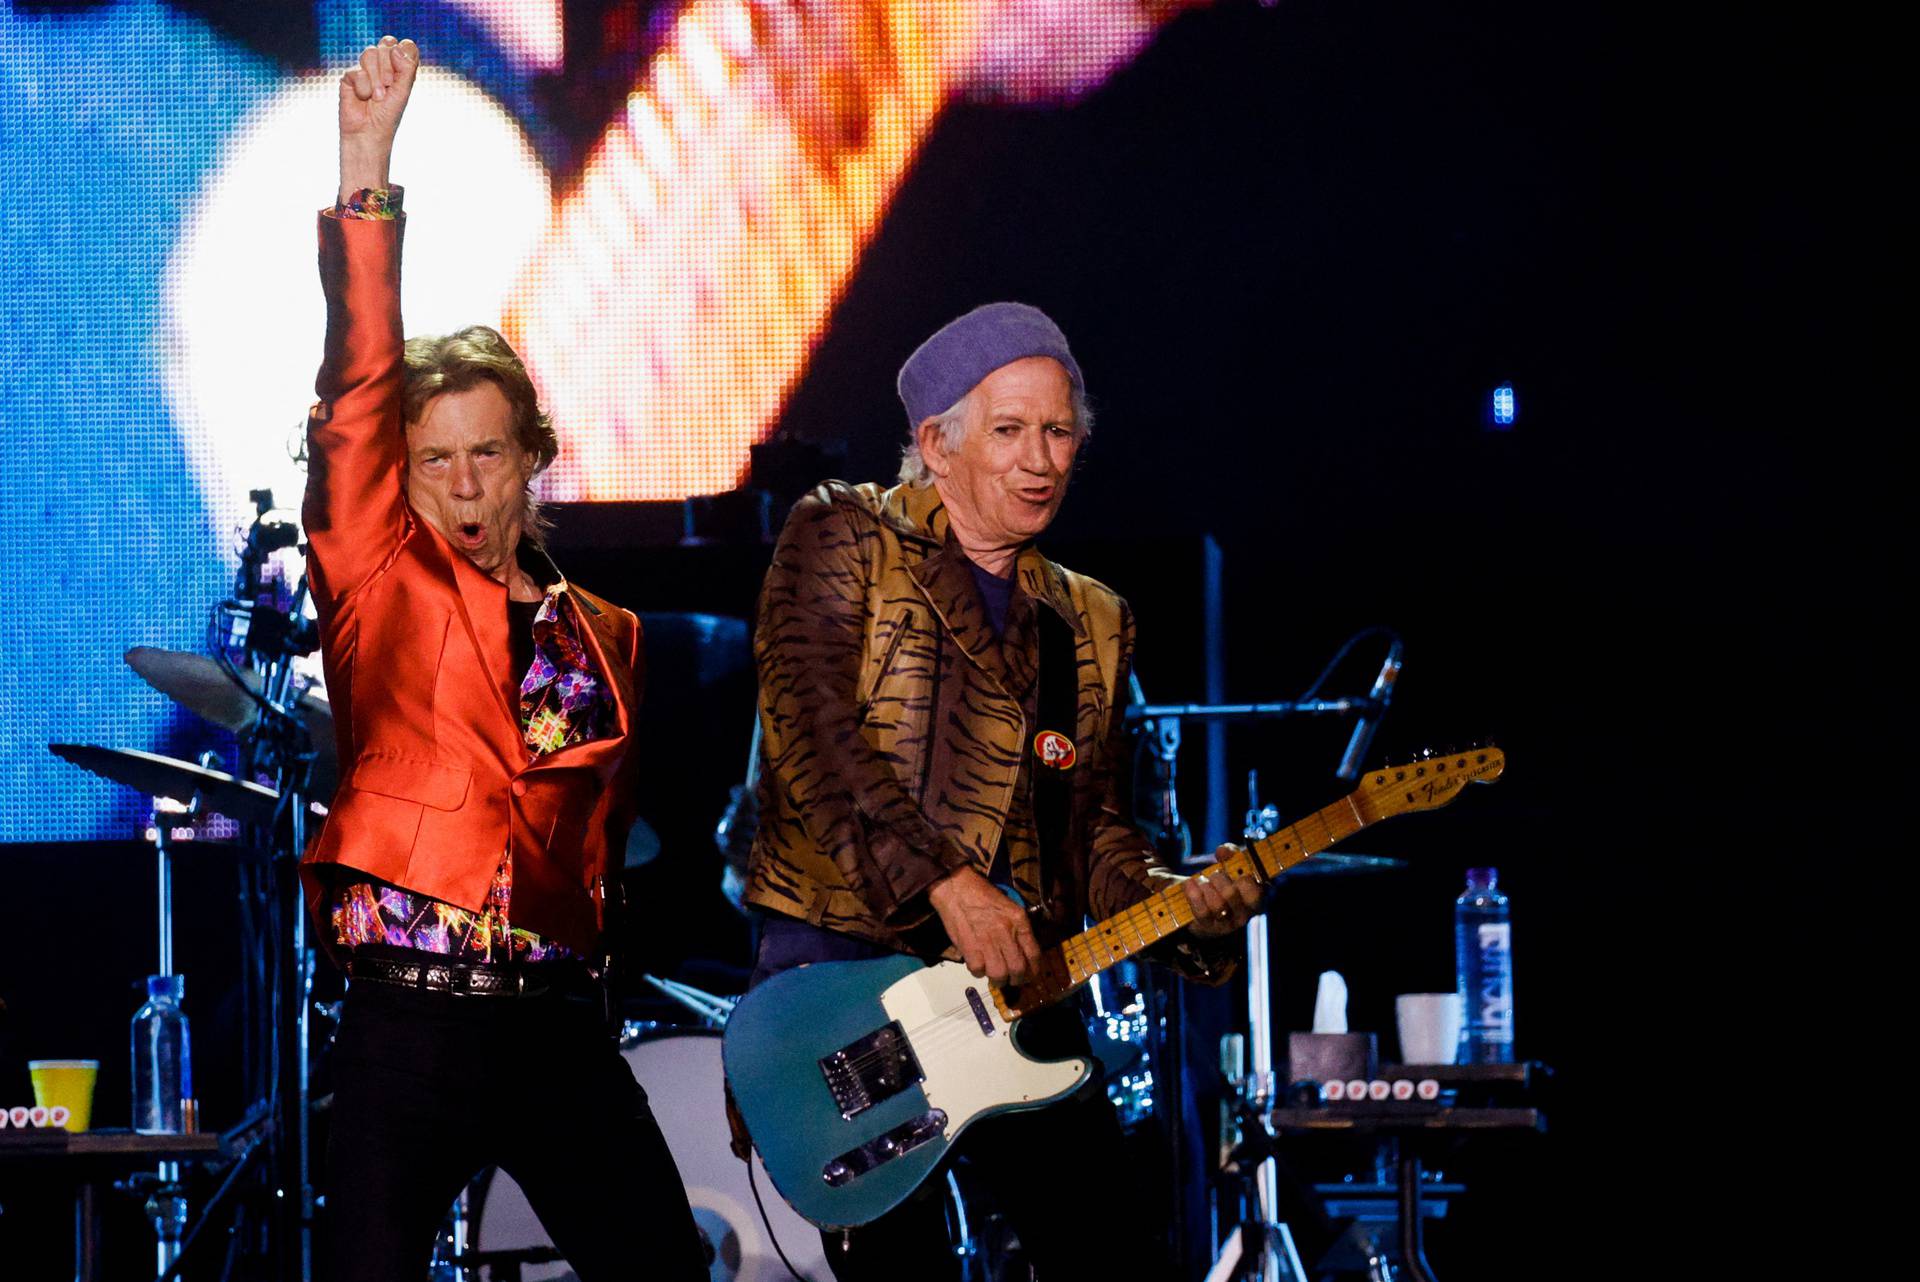 The Rolling Stones kick off their European tour in Madrid